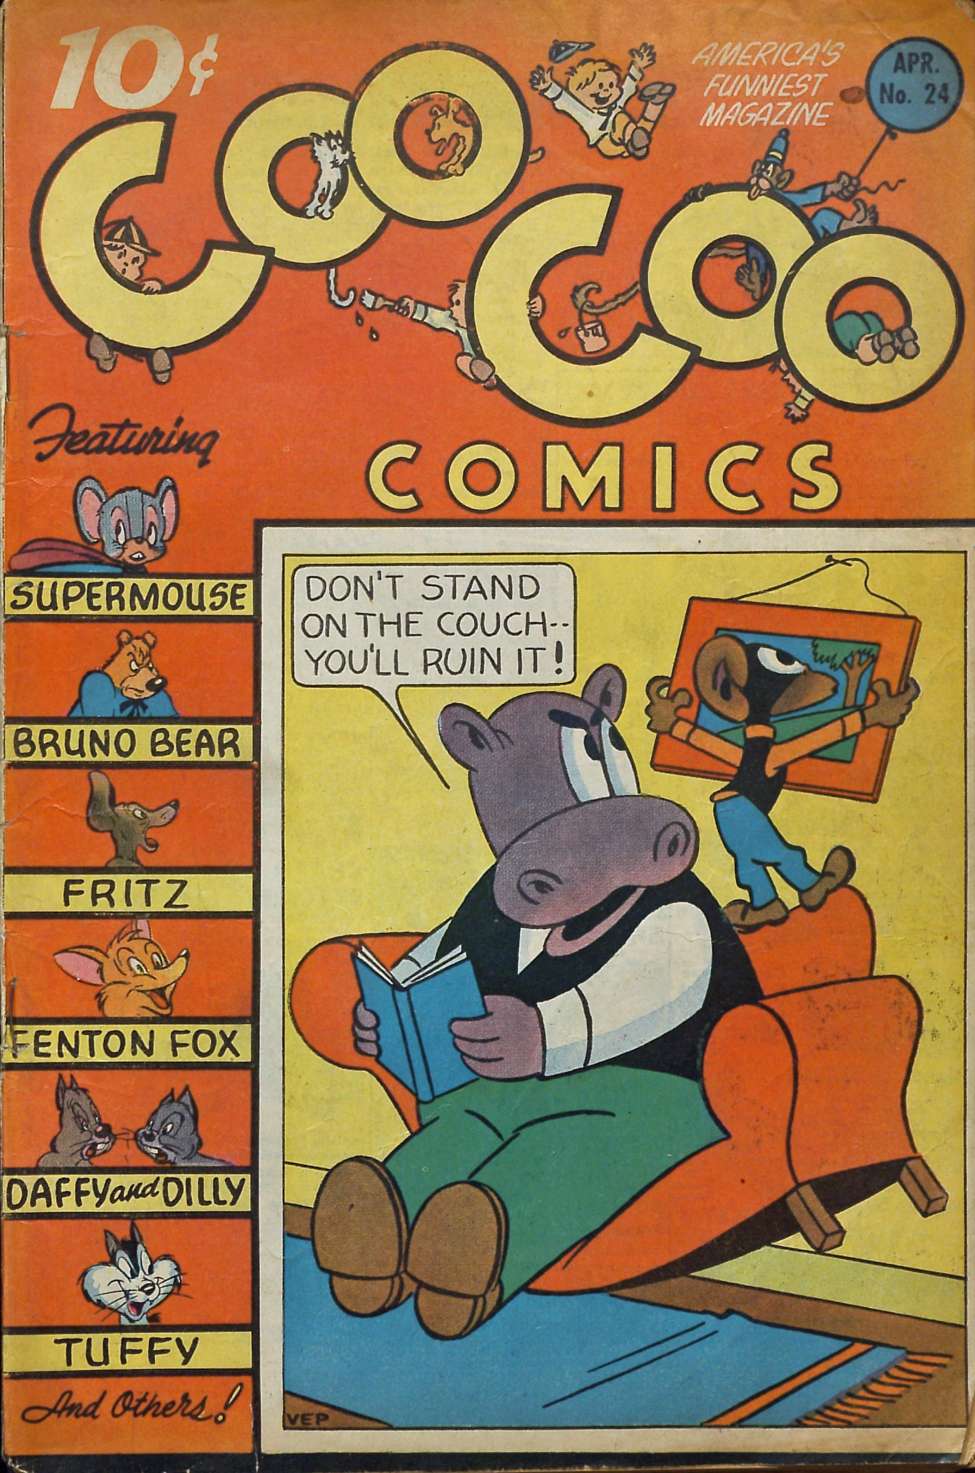 Book Cover For Coo Coo Comics 24